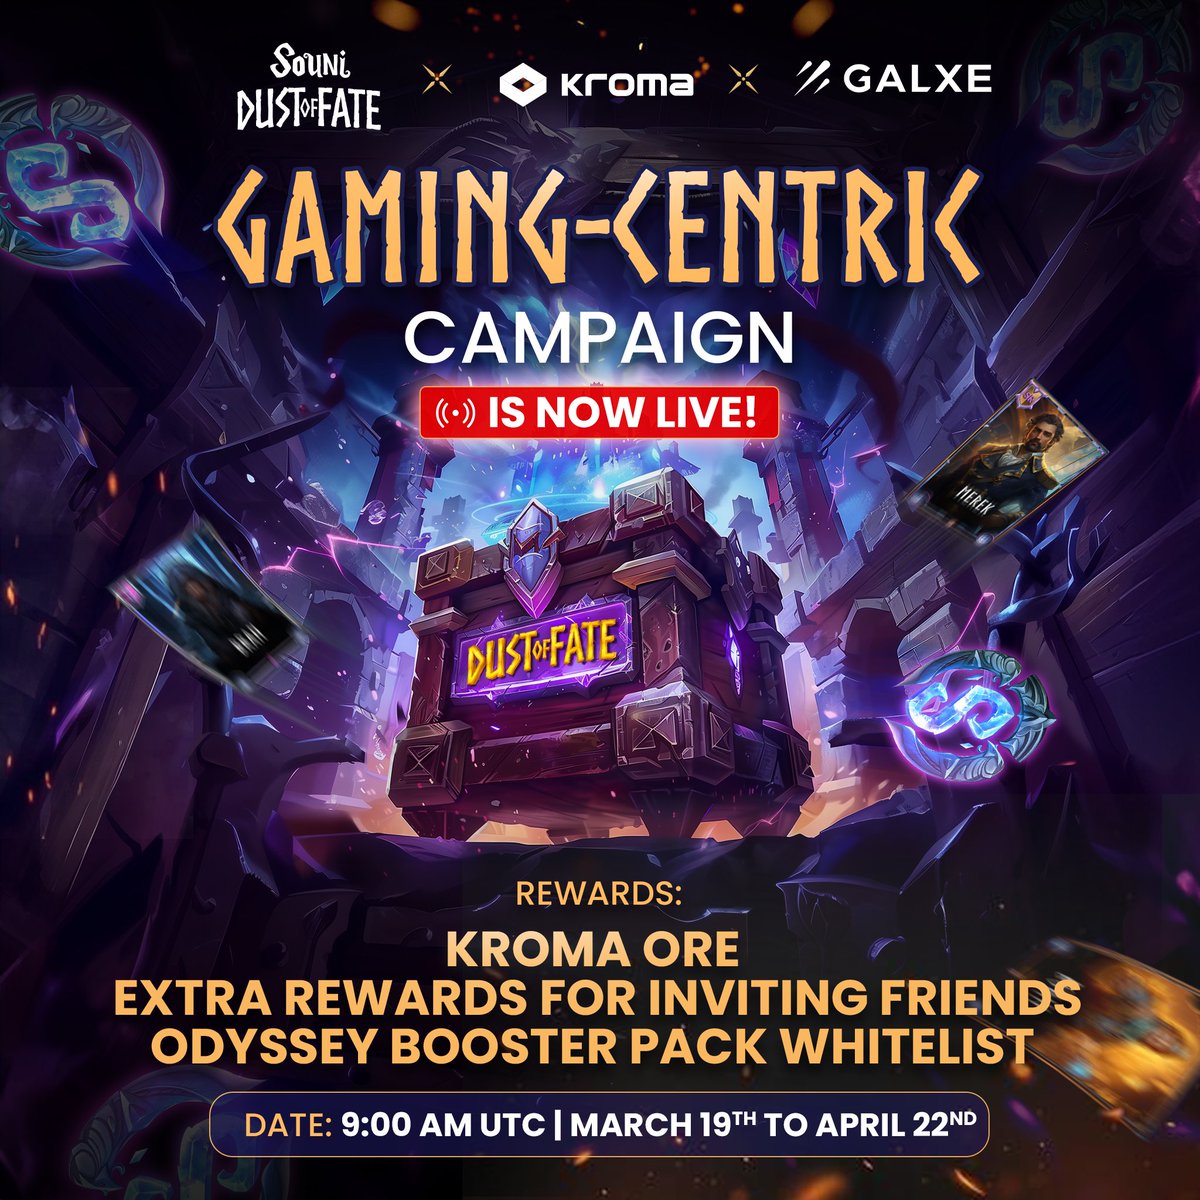 🚀 NOW LIVE: JOIN #SOUNI DUST OF FATE x KROMA x GALXE CAMPAIGN! 📣 💥 Prepare for the epic launch of Dust Of Fate TCG game, we're teaming up with @kroma_network for a gaming-centric campaign on @Galxe, packin' HUGE rewards. 🔗 Jump in NOW: galxe.com/kroma/campaign… ⏰ Duration:…